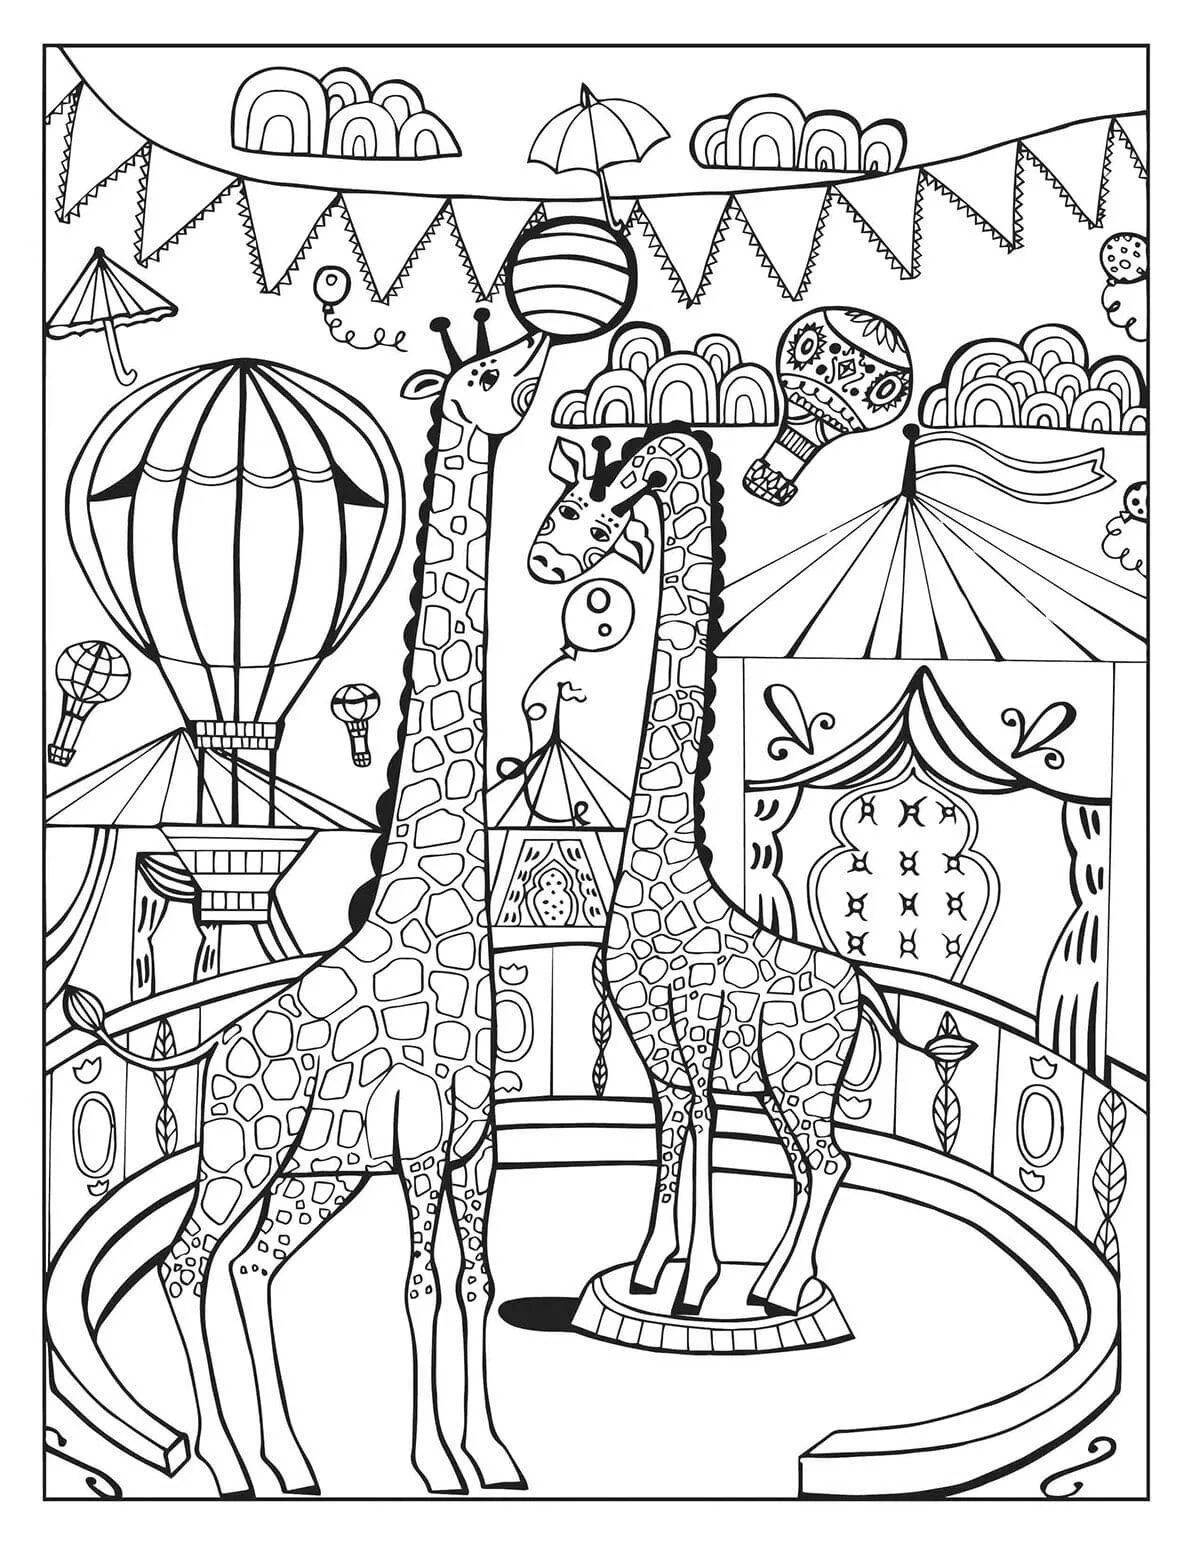 Colorful circus performer coloring page